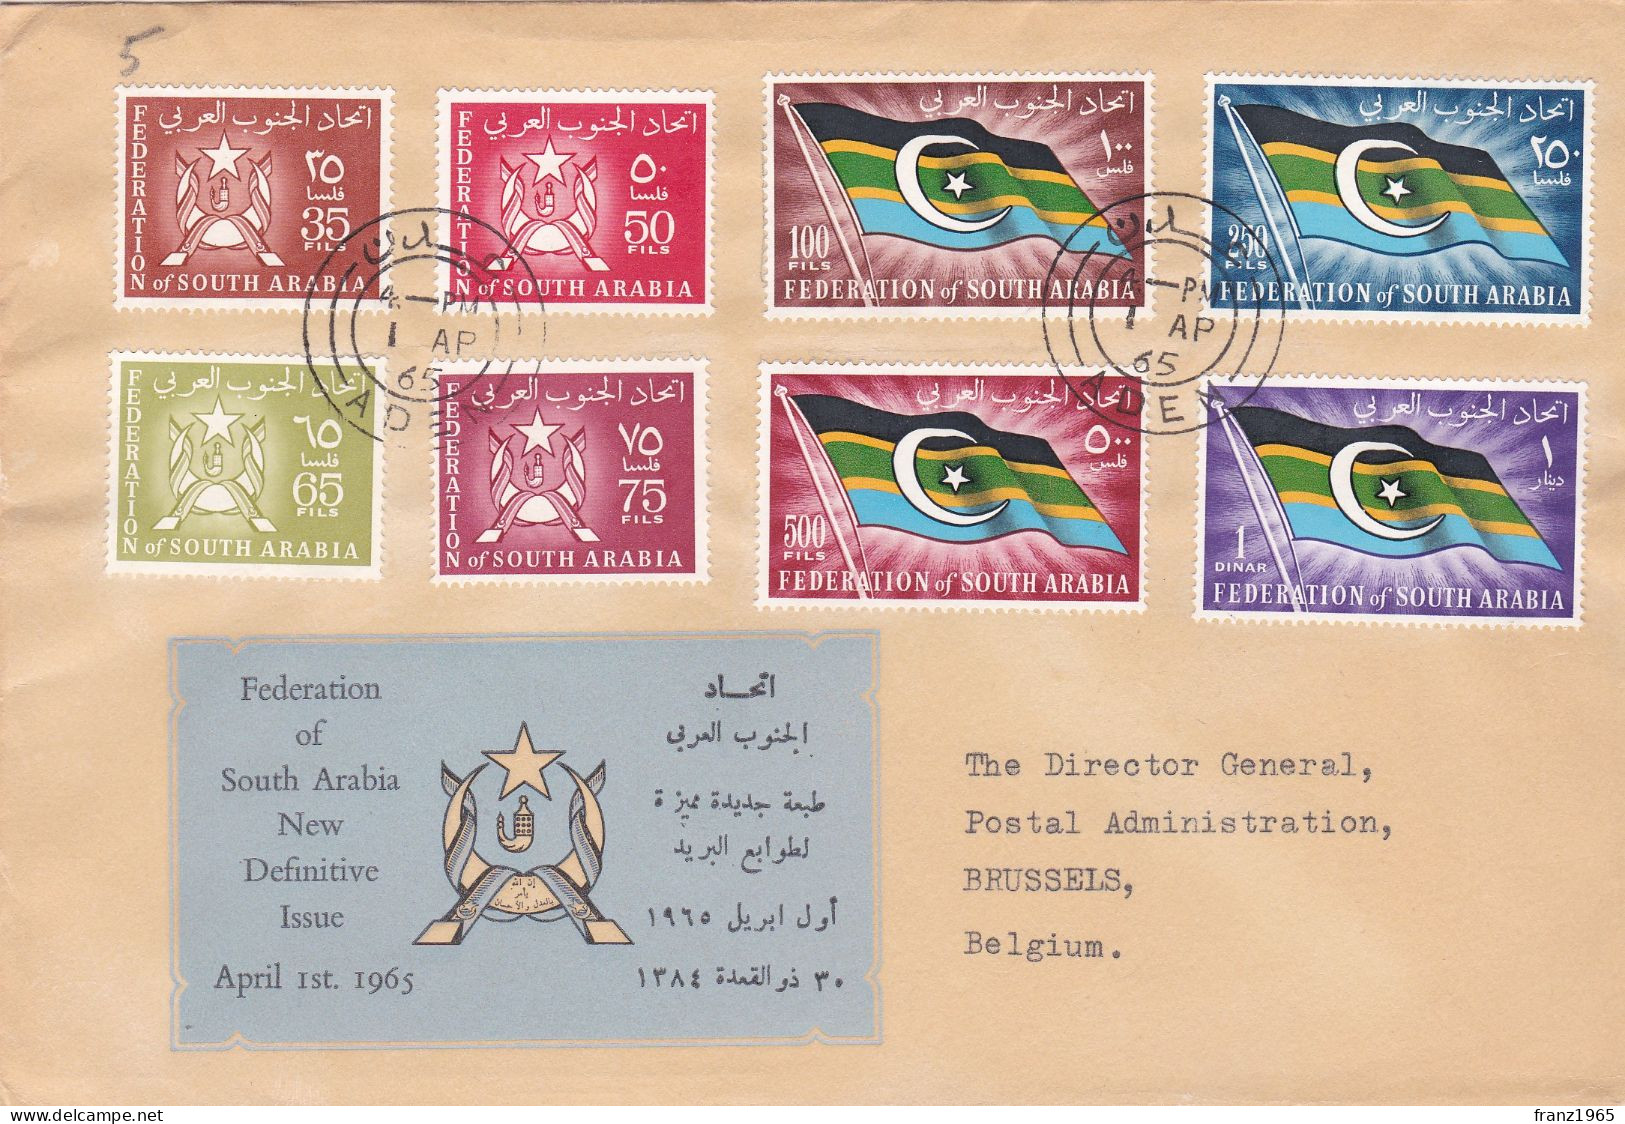 Federation Of South Arabia - Definitives - FDC - Asia (Other)